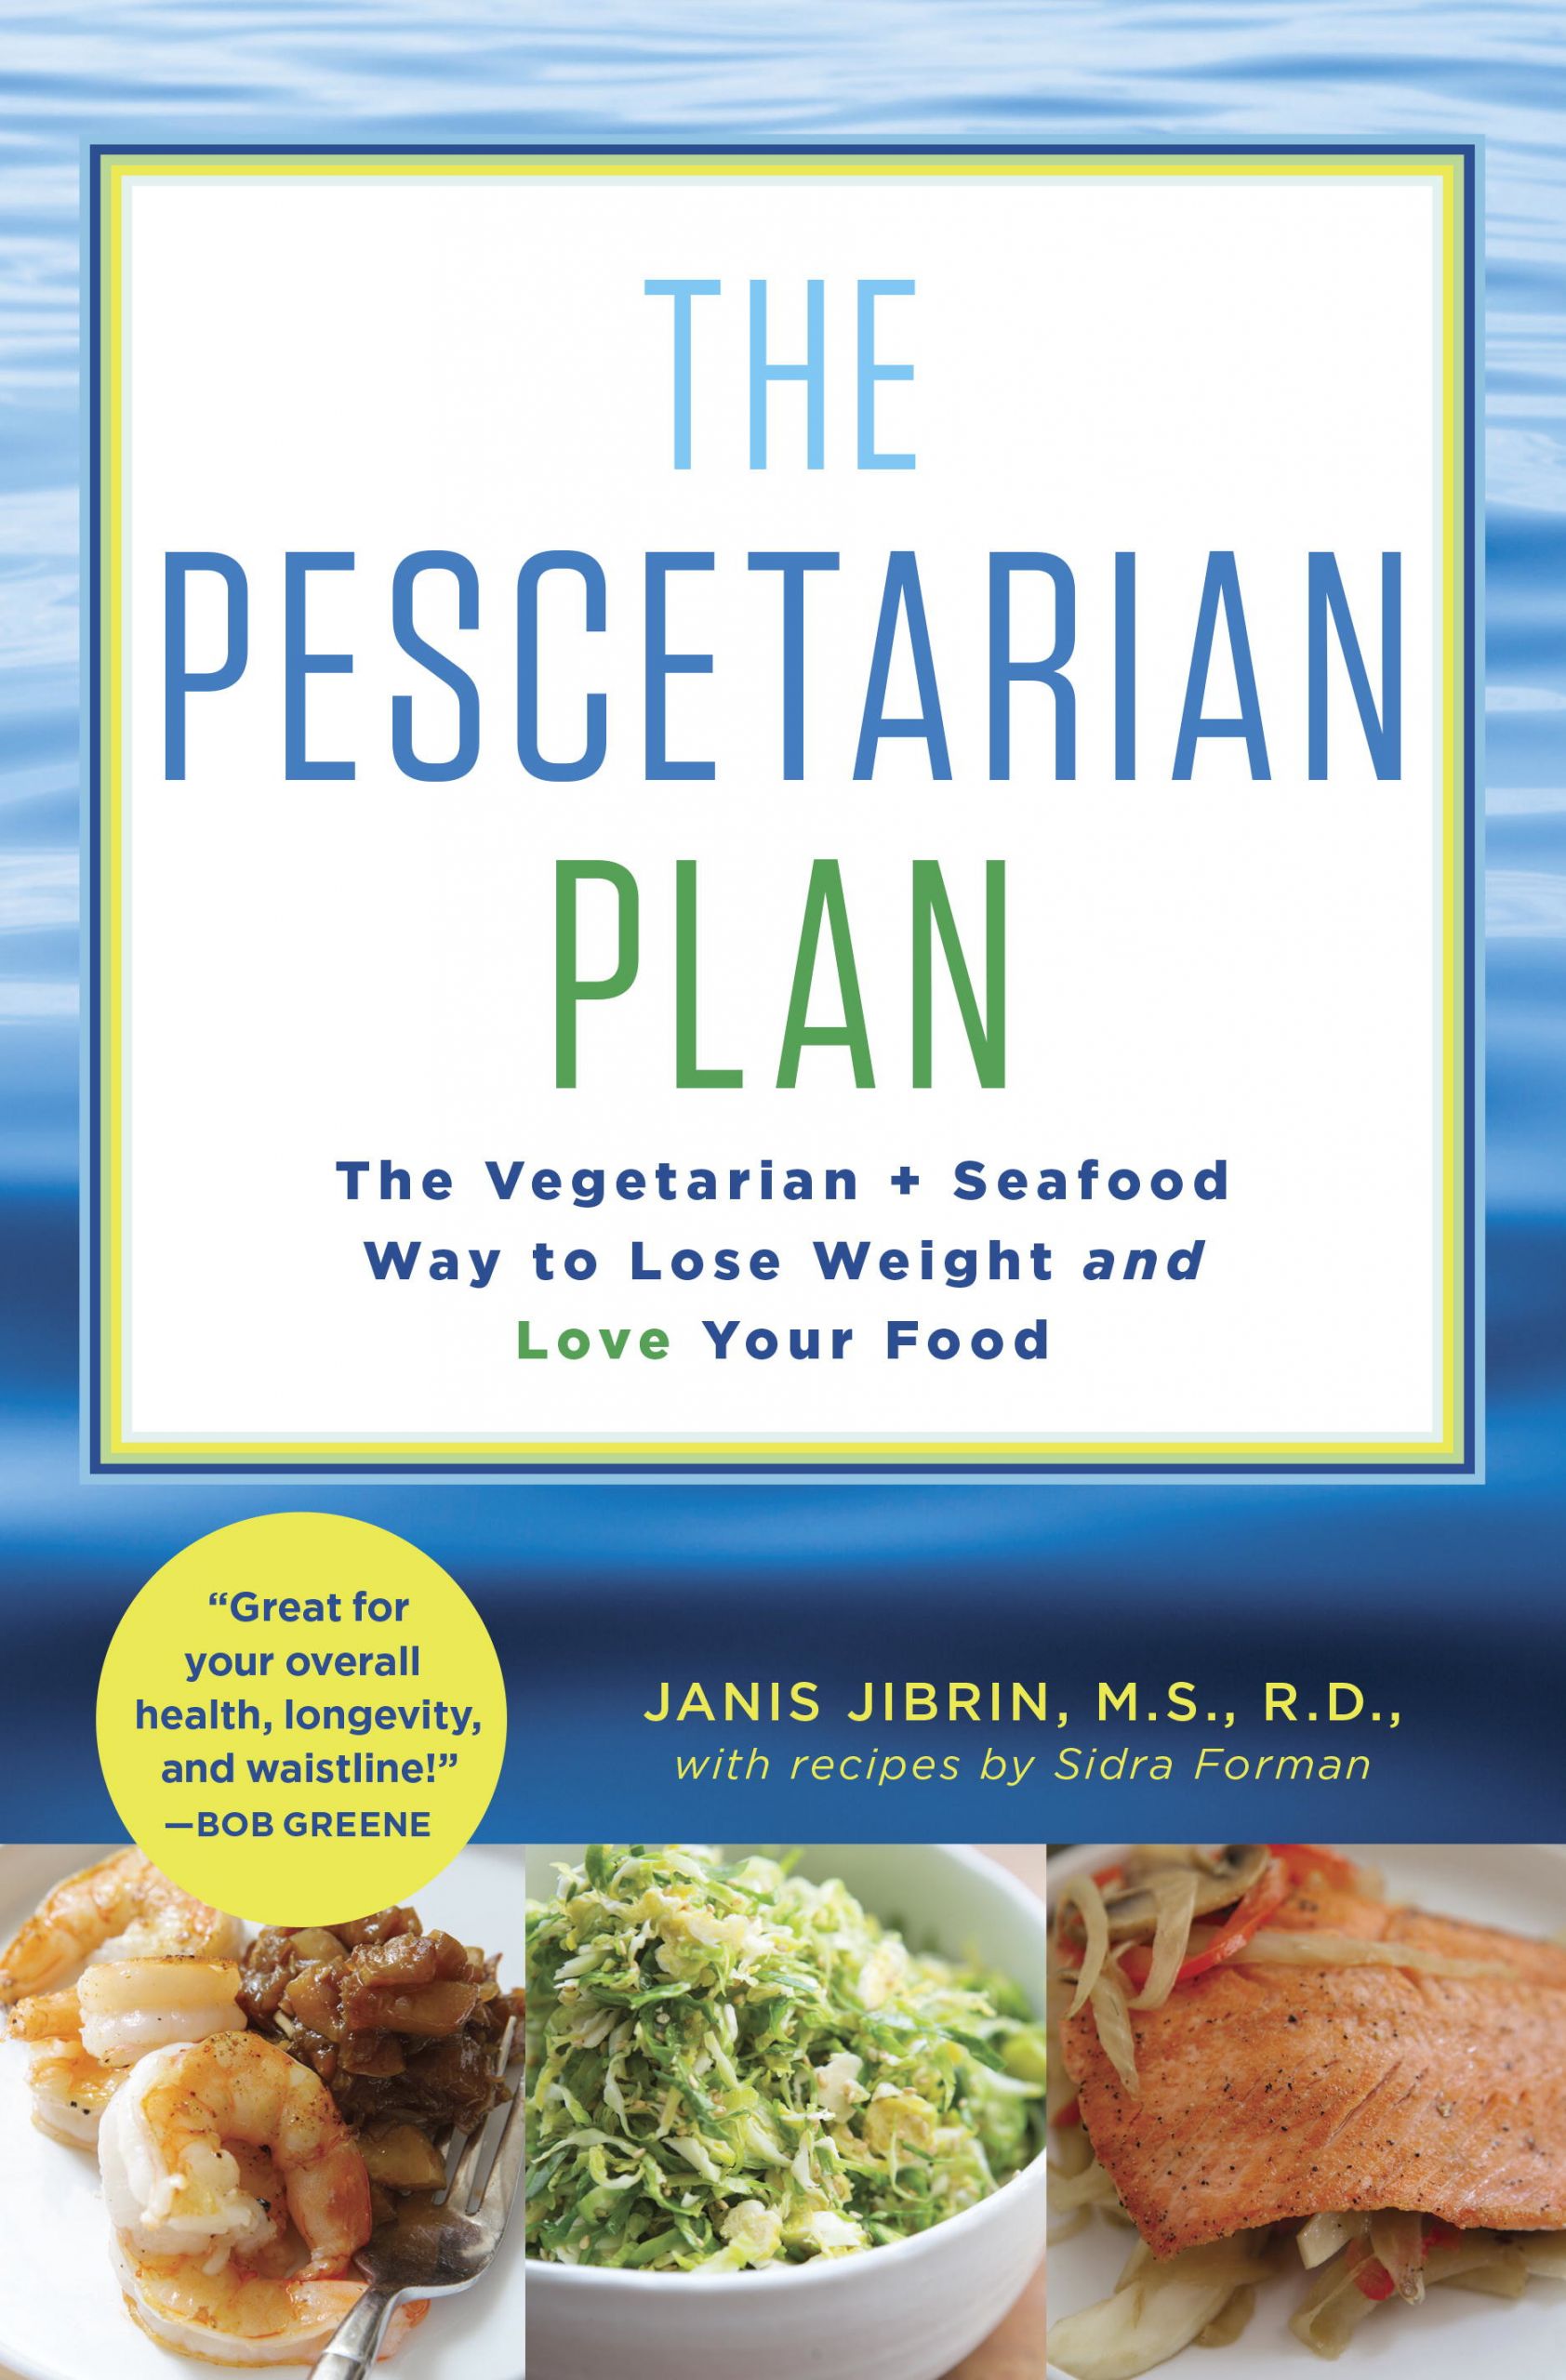 Pescatarian Weight Loss Meal Plan
 My New Book– The Pescetarian Plan Janis Jibrin M S R D